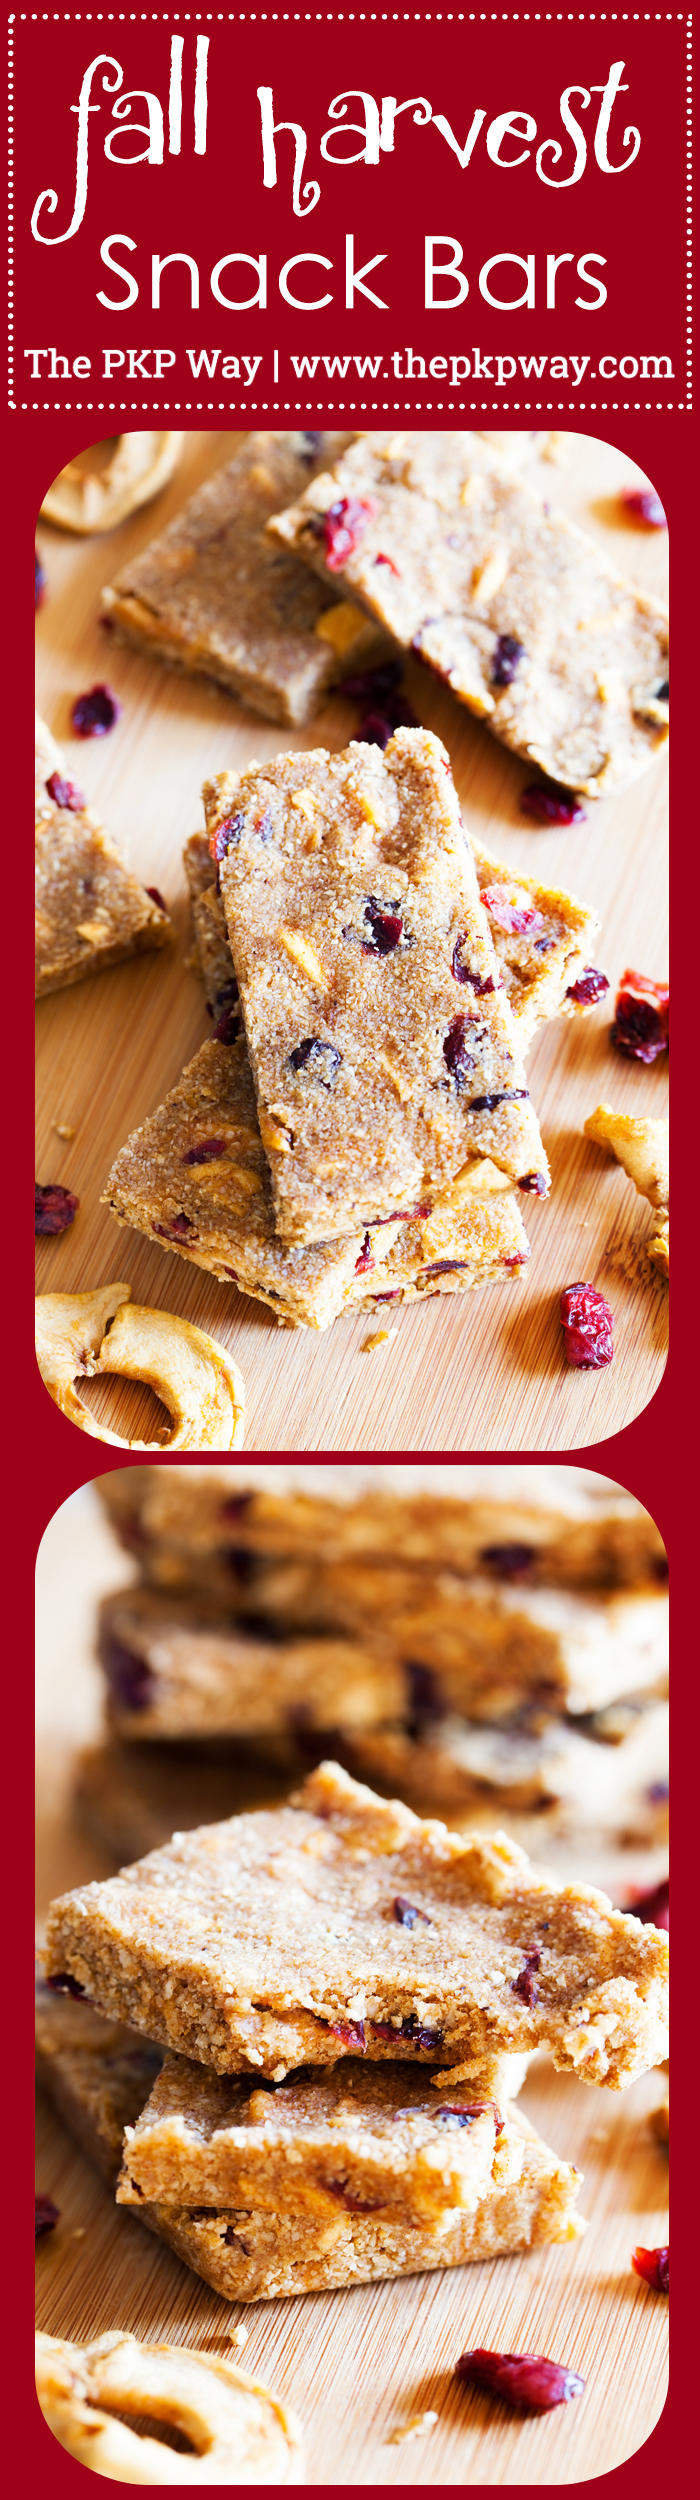 Pumpkin, apples, and cranberries, these Fall Harvest Snack Bars have all the best flavors of Fall.